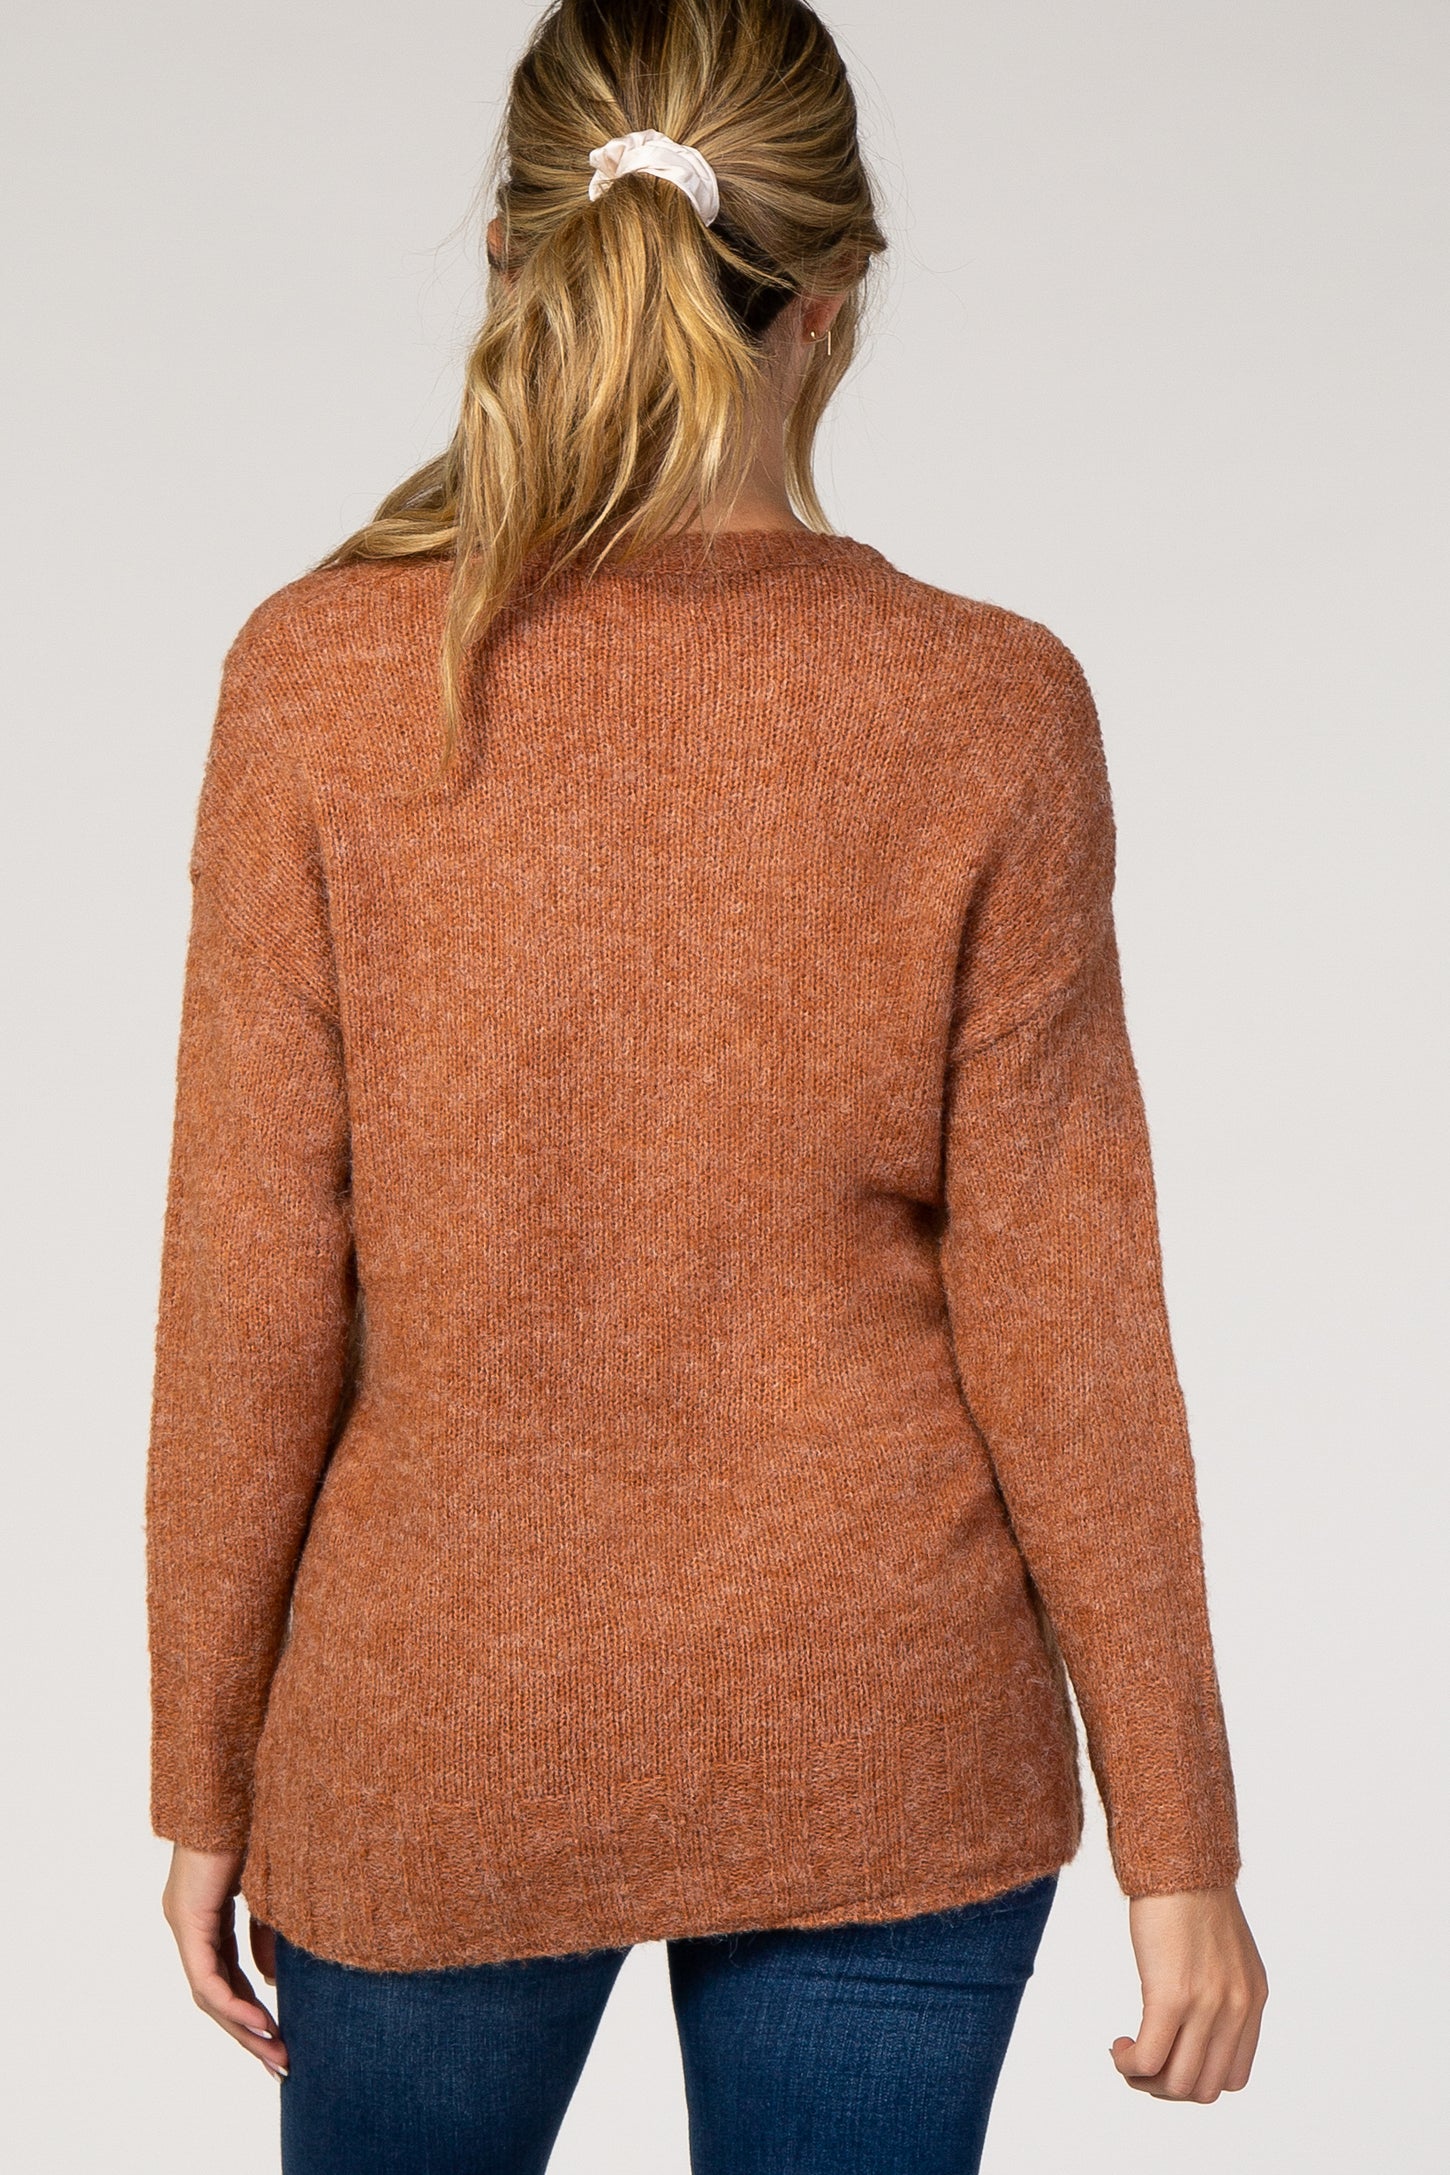 Rust Solid V-Neck Maternity Sweater